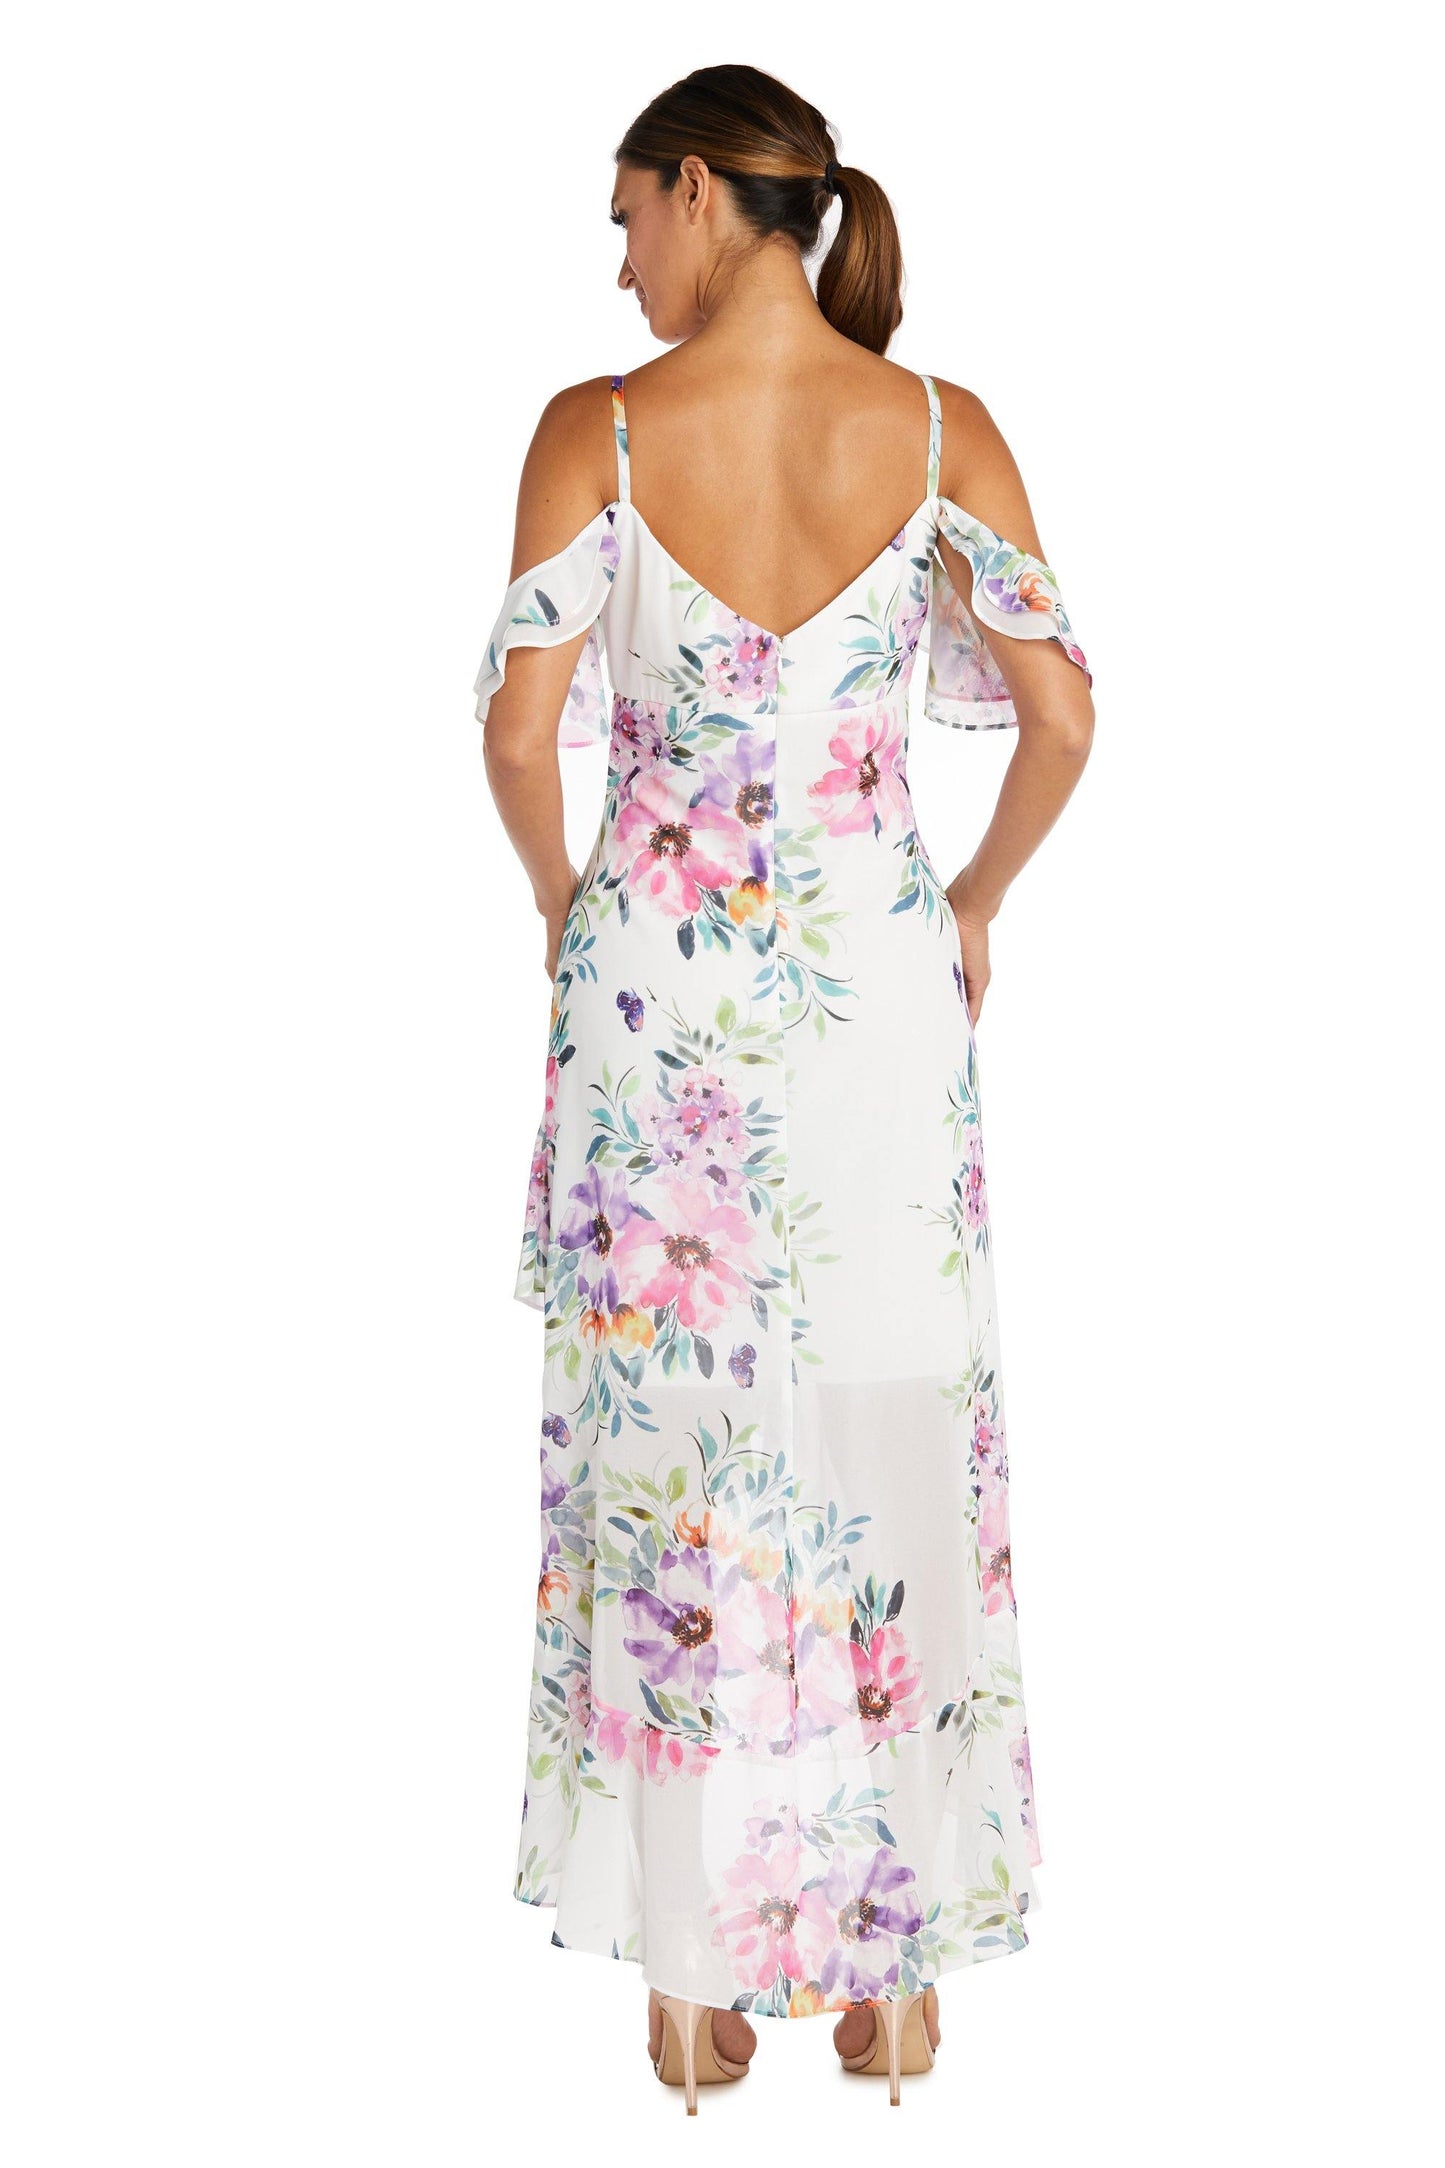 Nightway High Low Floral Print Dress 22054 - The Dress Outlet